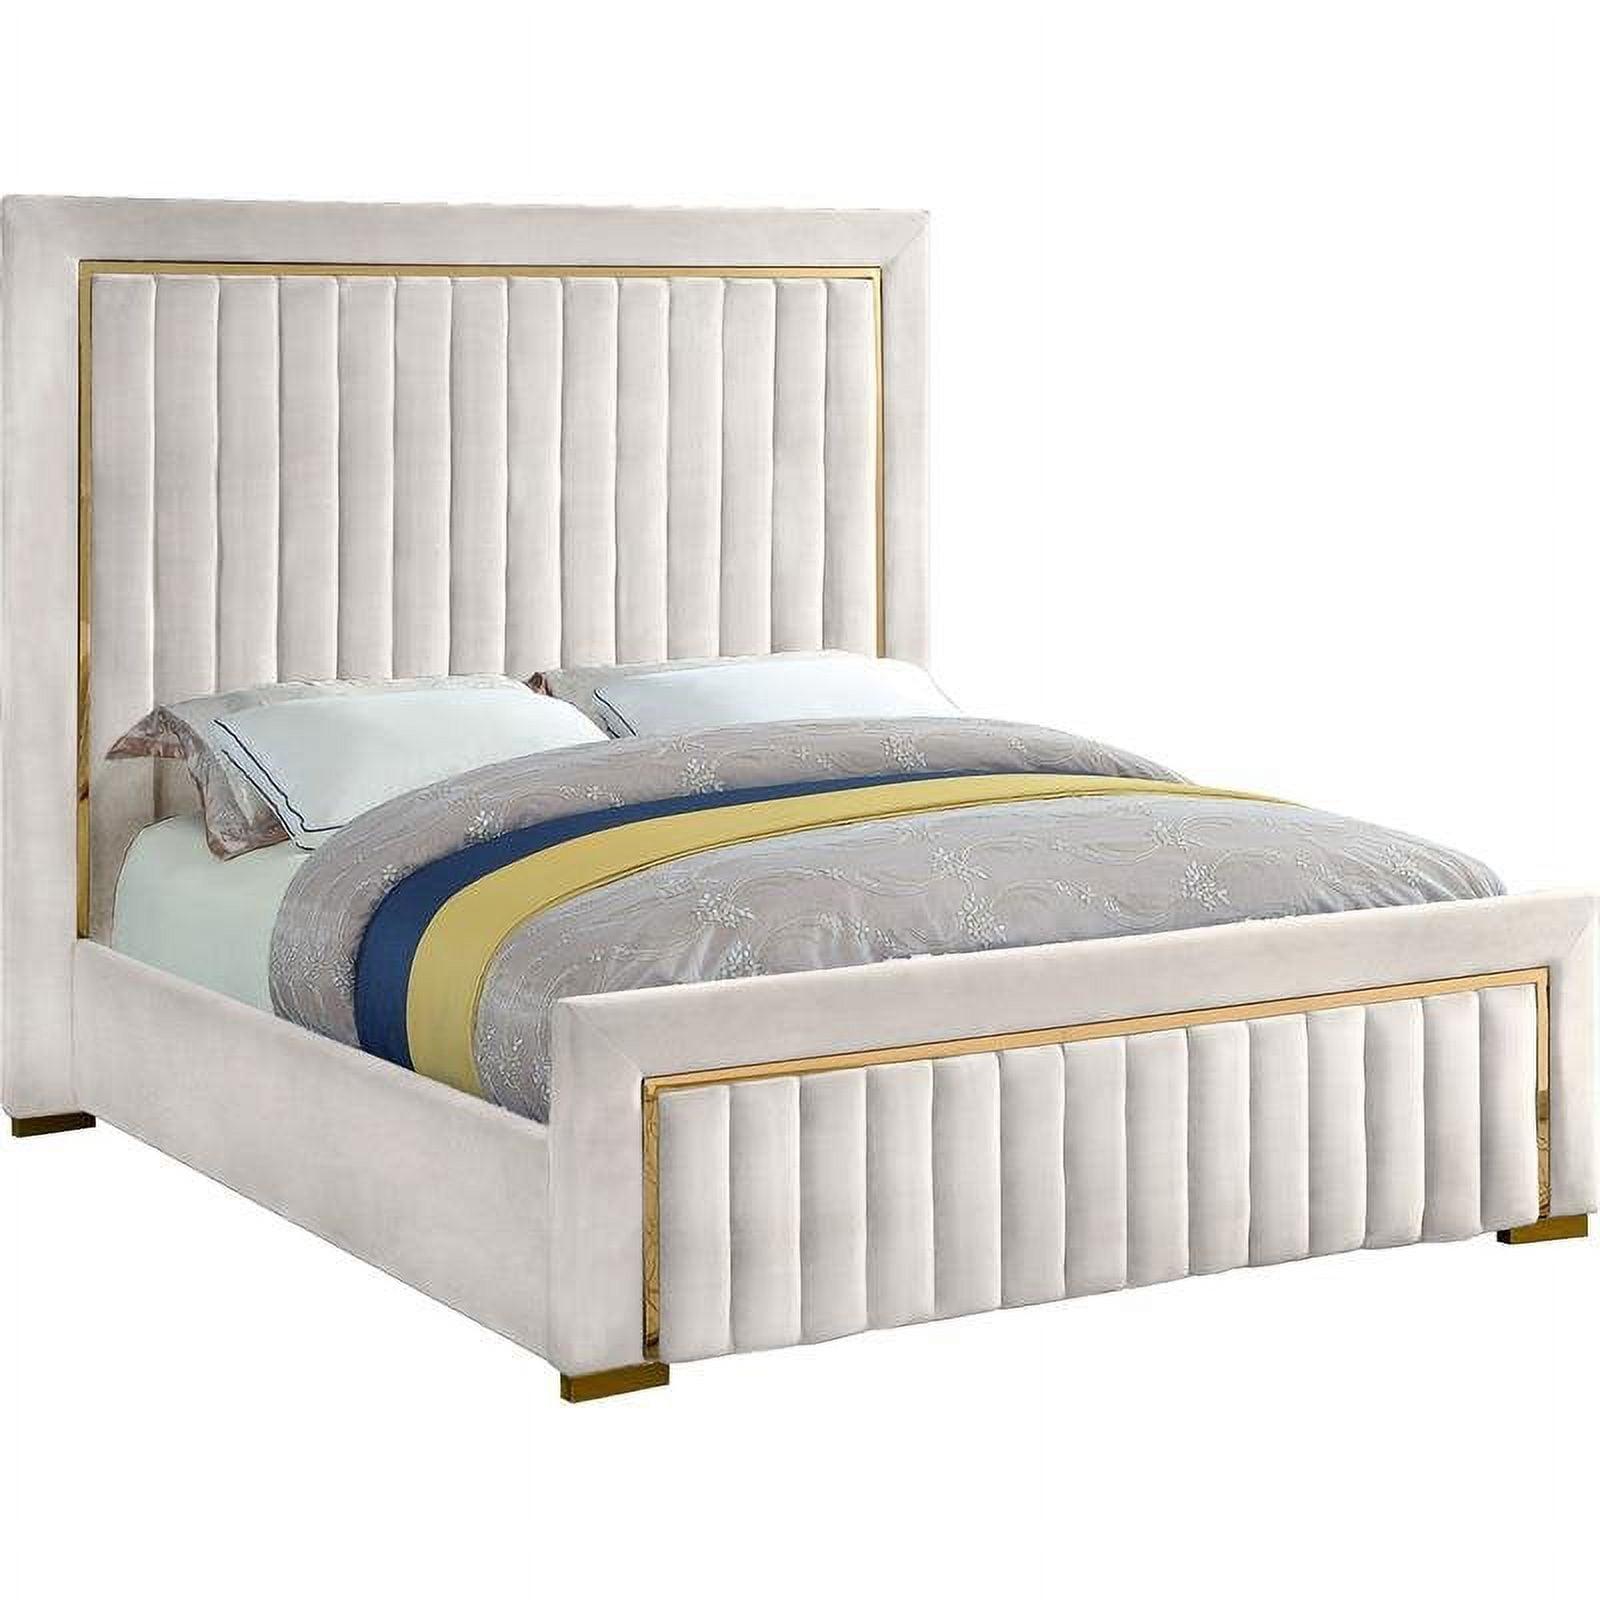 Regal Dolce Cream Velvet Queen Bed with Gold Trim and Tall Headboard